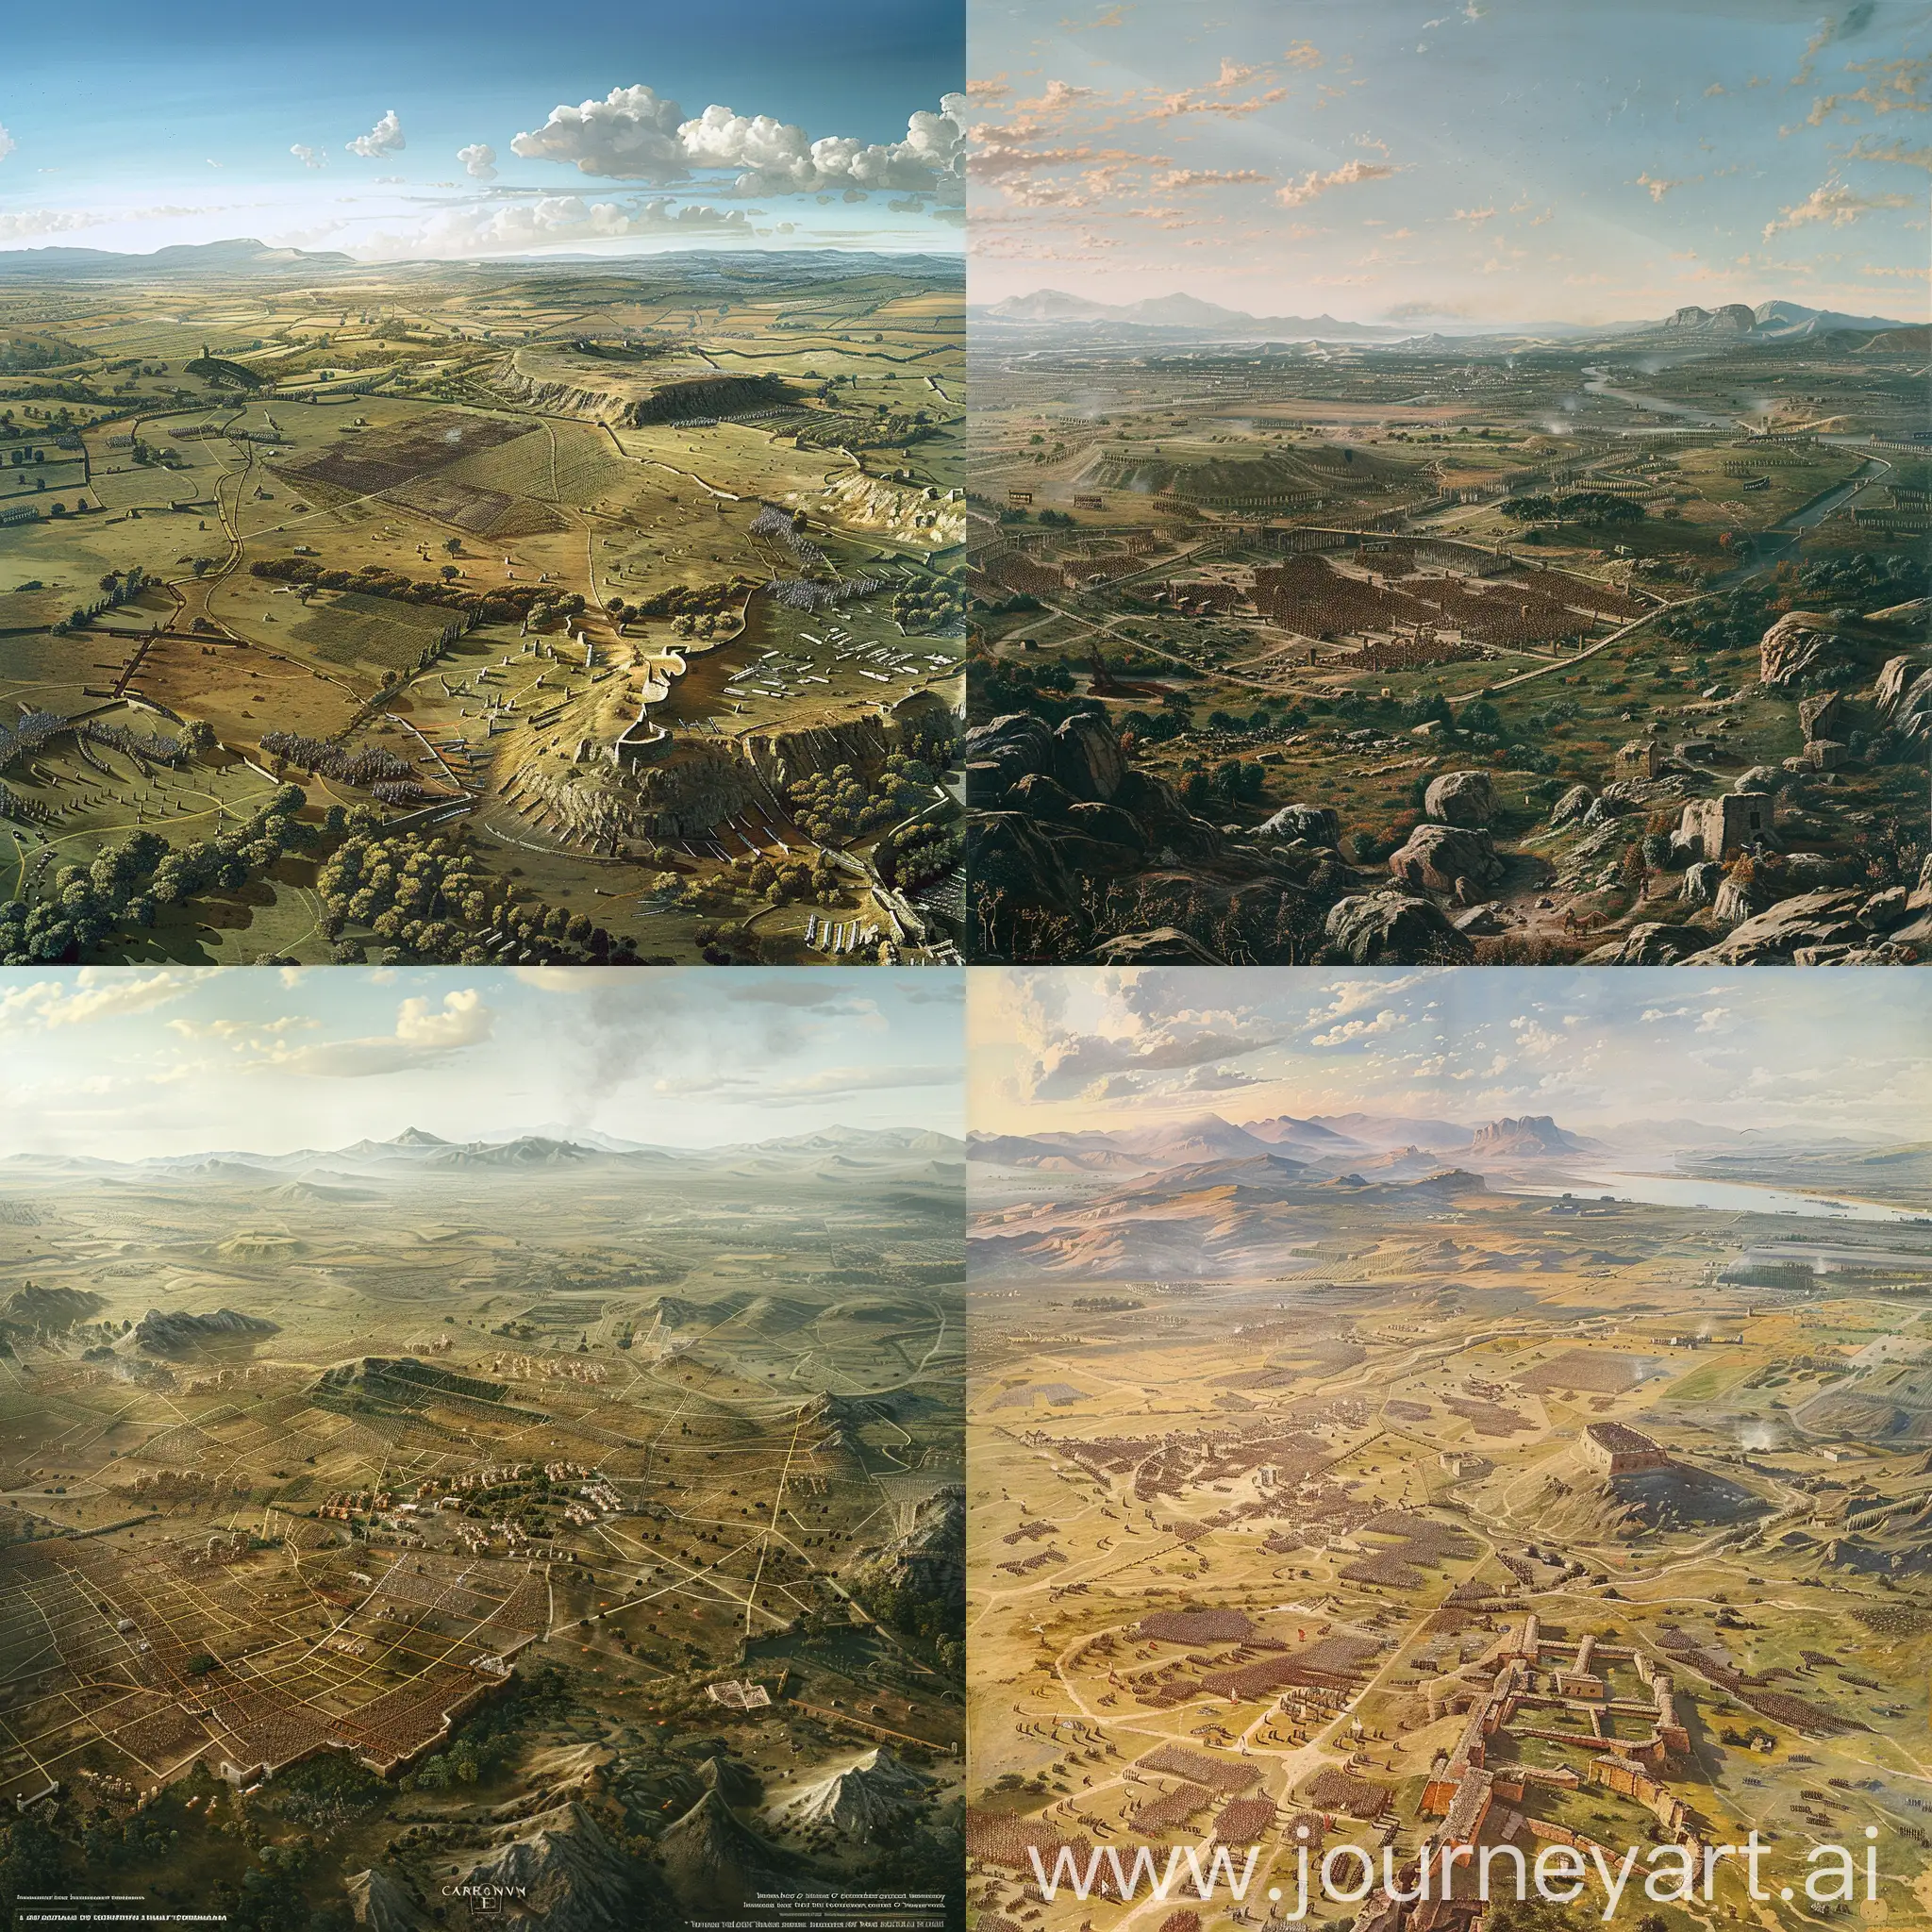 A panoramic view of the battlefield at Cannae, showcasing the vast expanse of the Carthaginian encirclement and the trapped Roman army